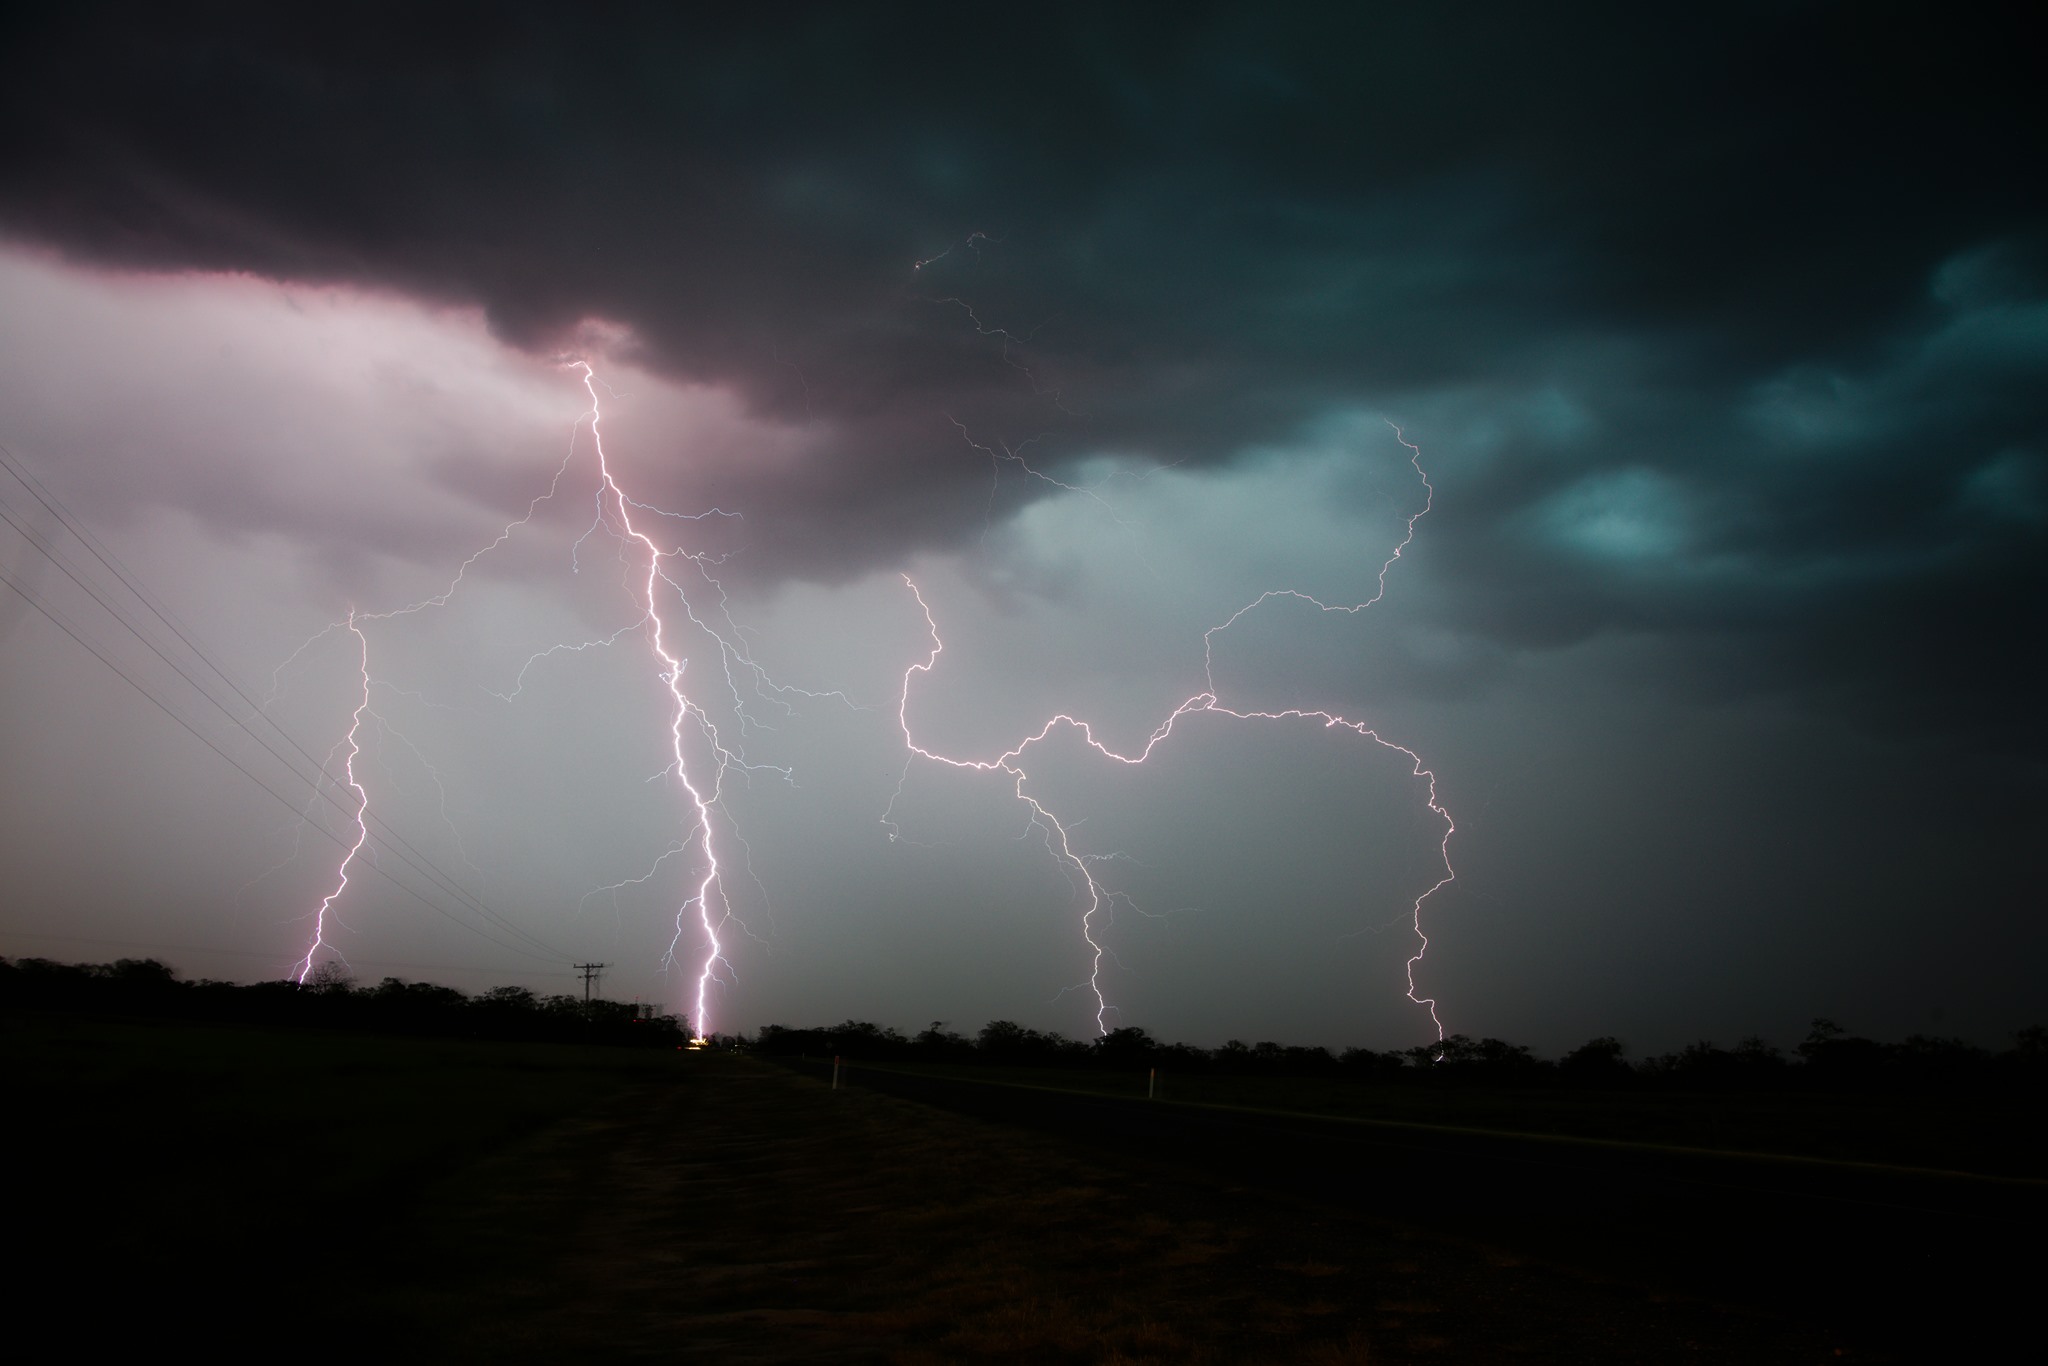 I can’t believe it has been this long - Jimmy west of Wee Waa
 Jimmy

Lightning last night near Moree 21st January 2021 - quite a barrage. With Colin ...